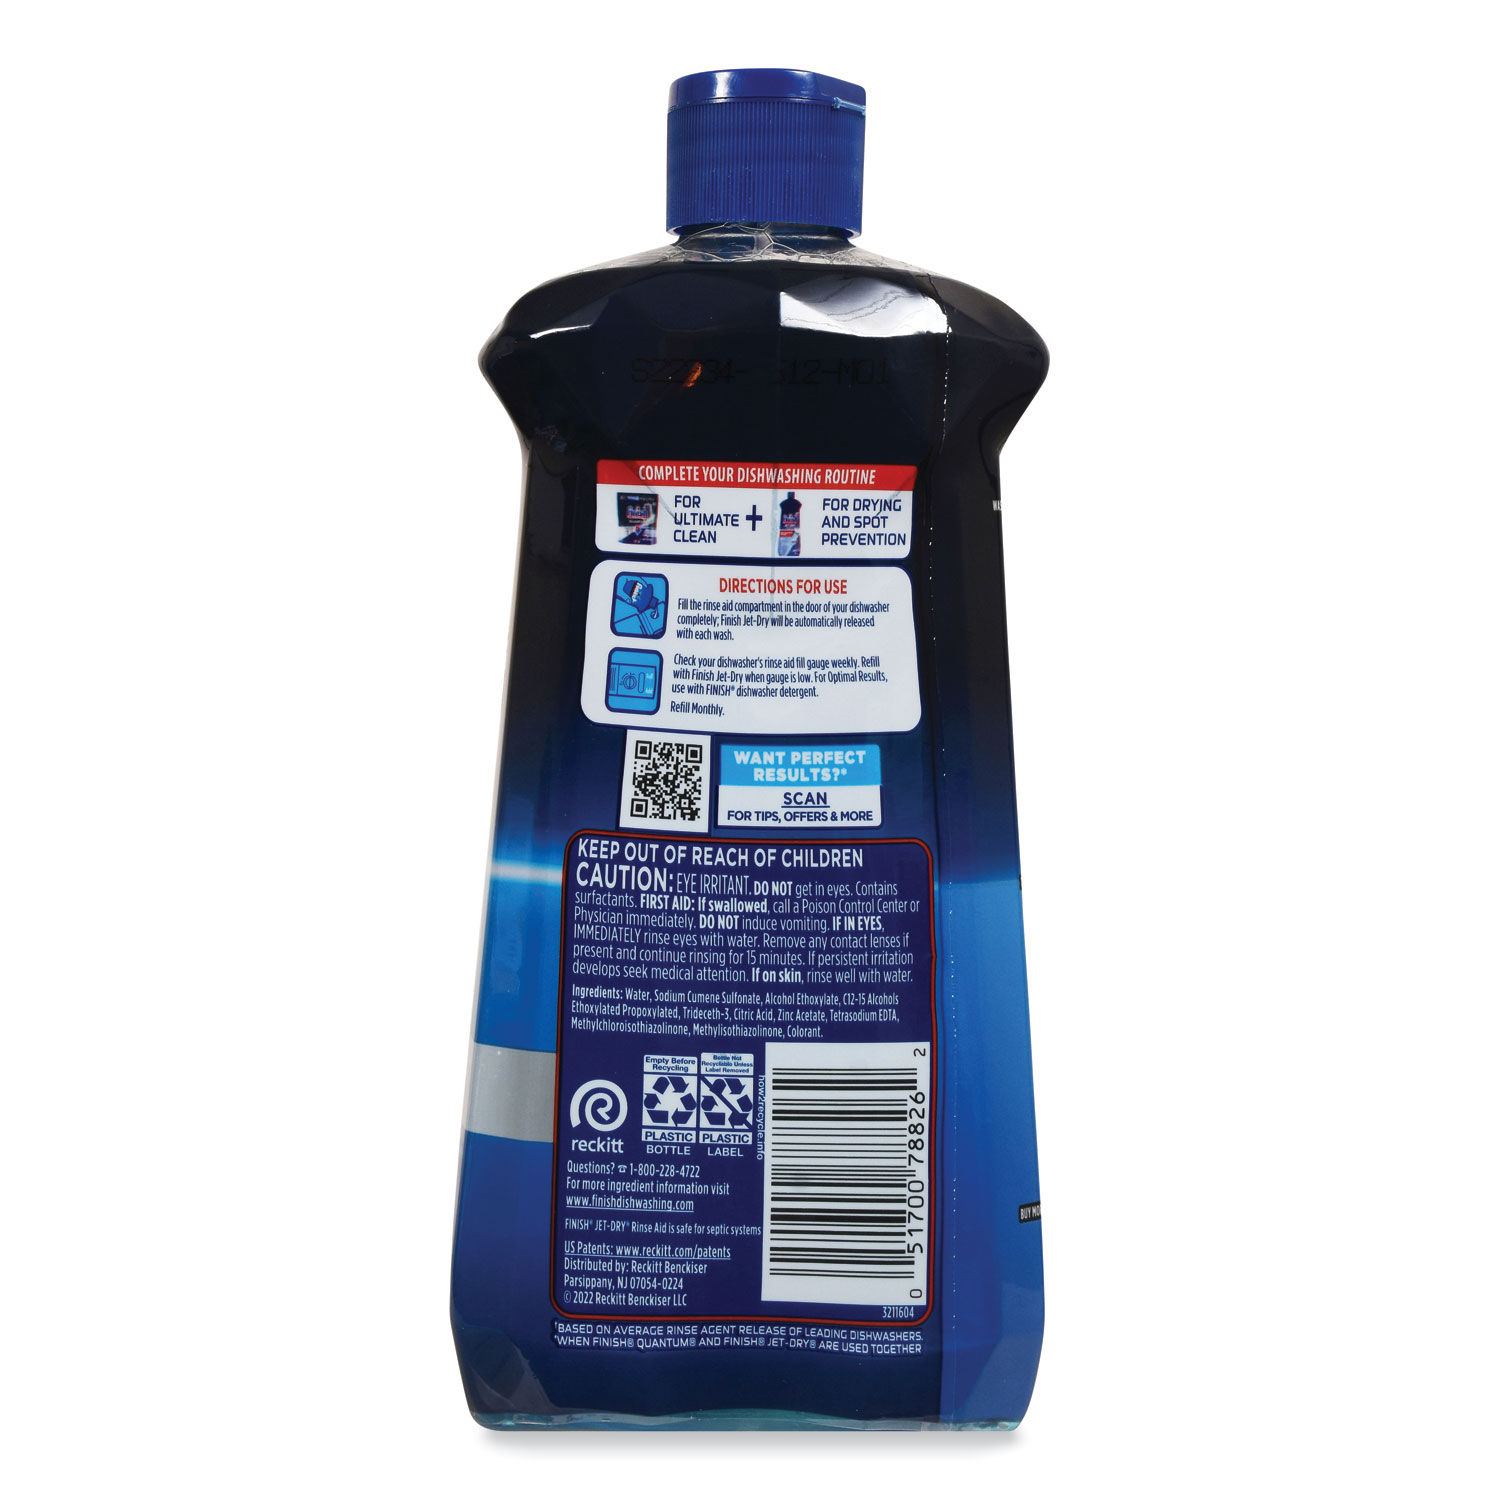 Jet-Dry Rinse Agent by FINISH® RAC78826